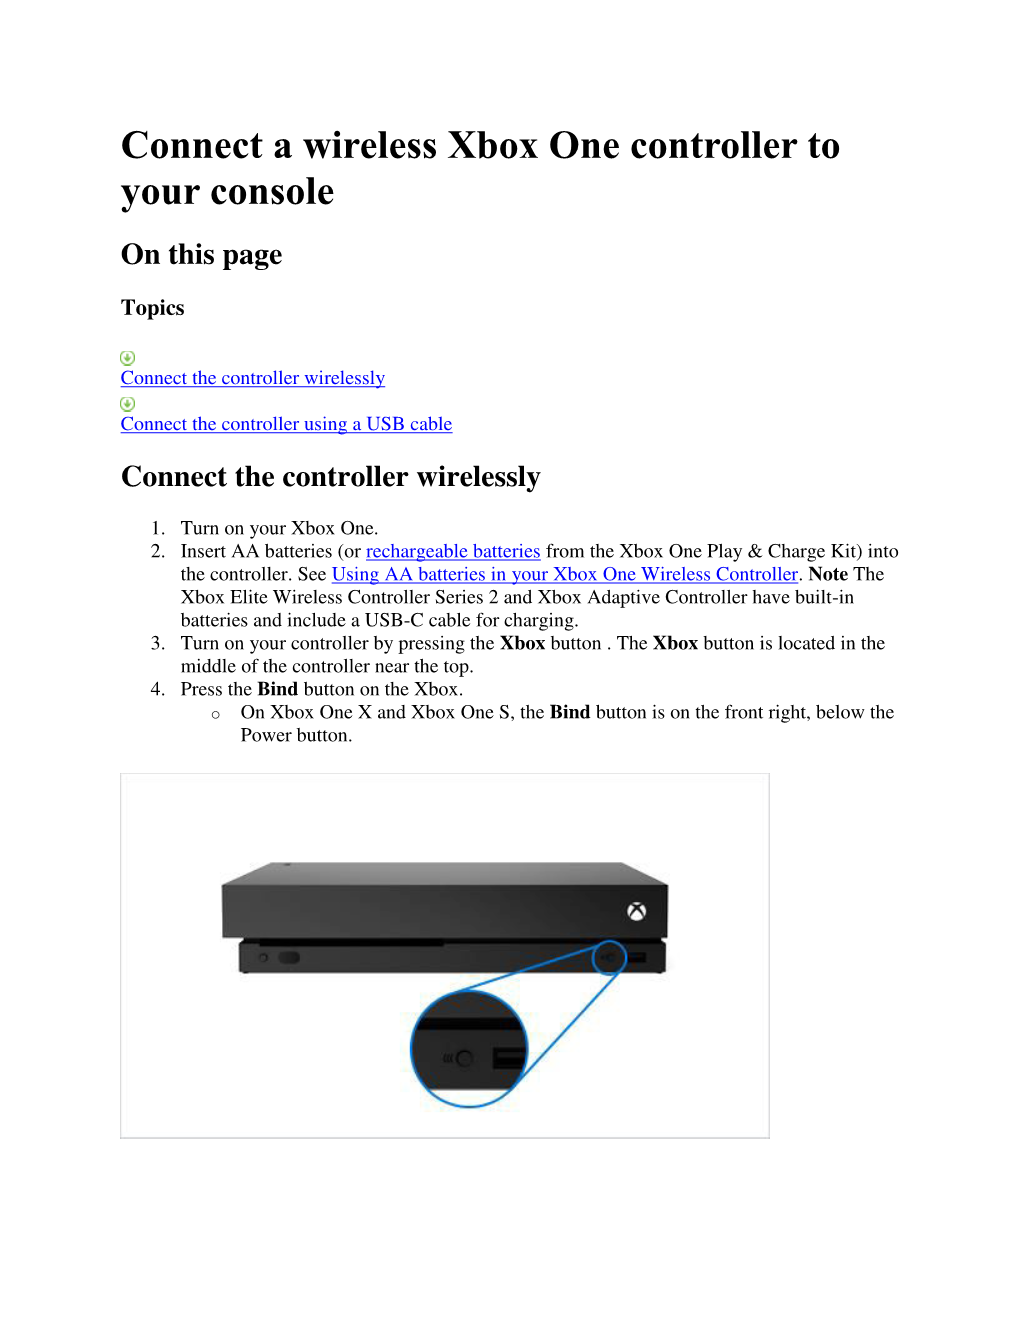 Connect a Wireless Xbox One Controller to Your Console on This Page